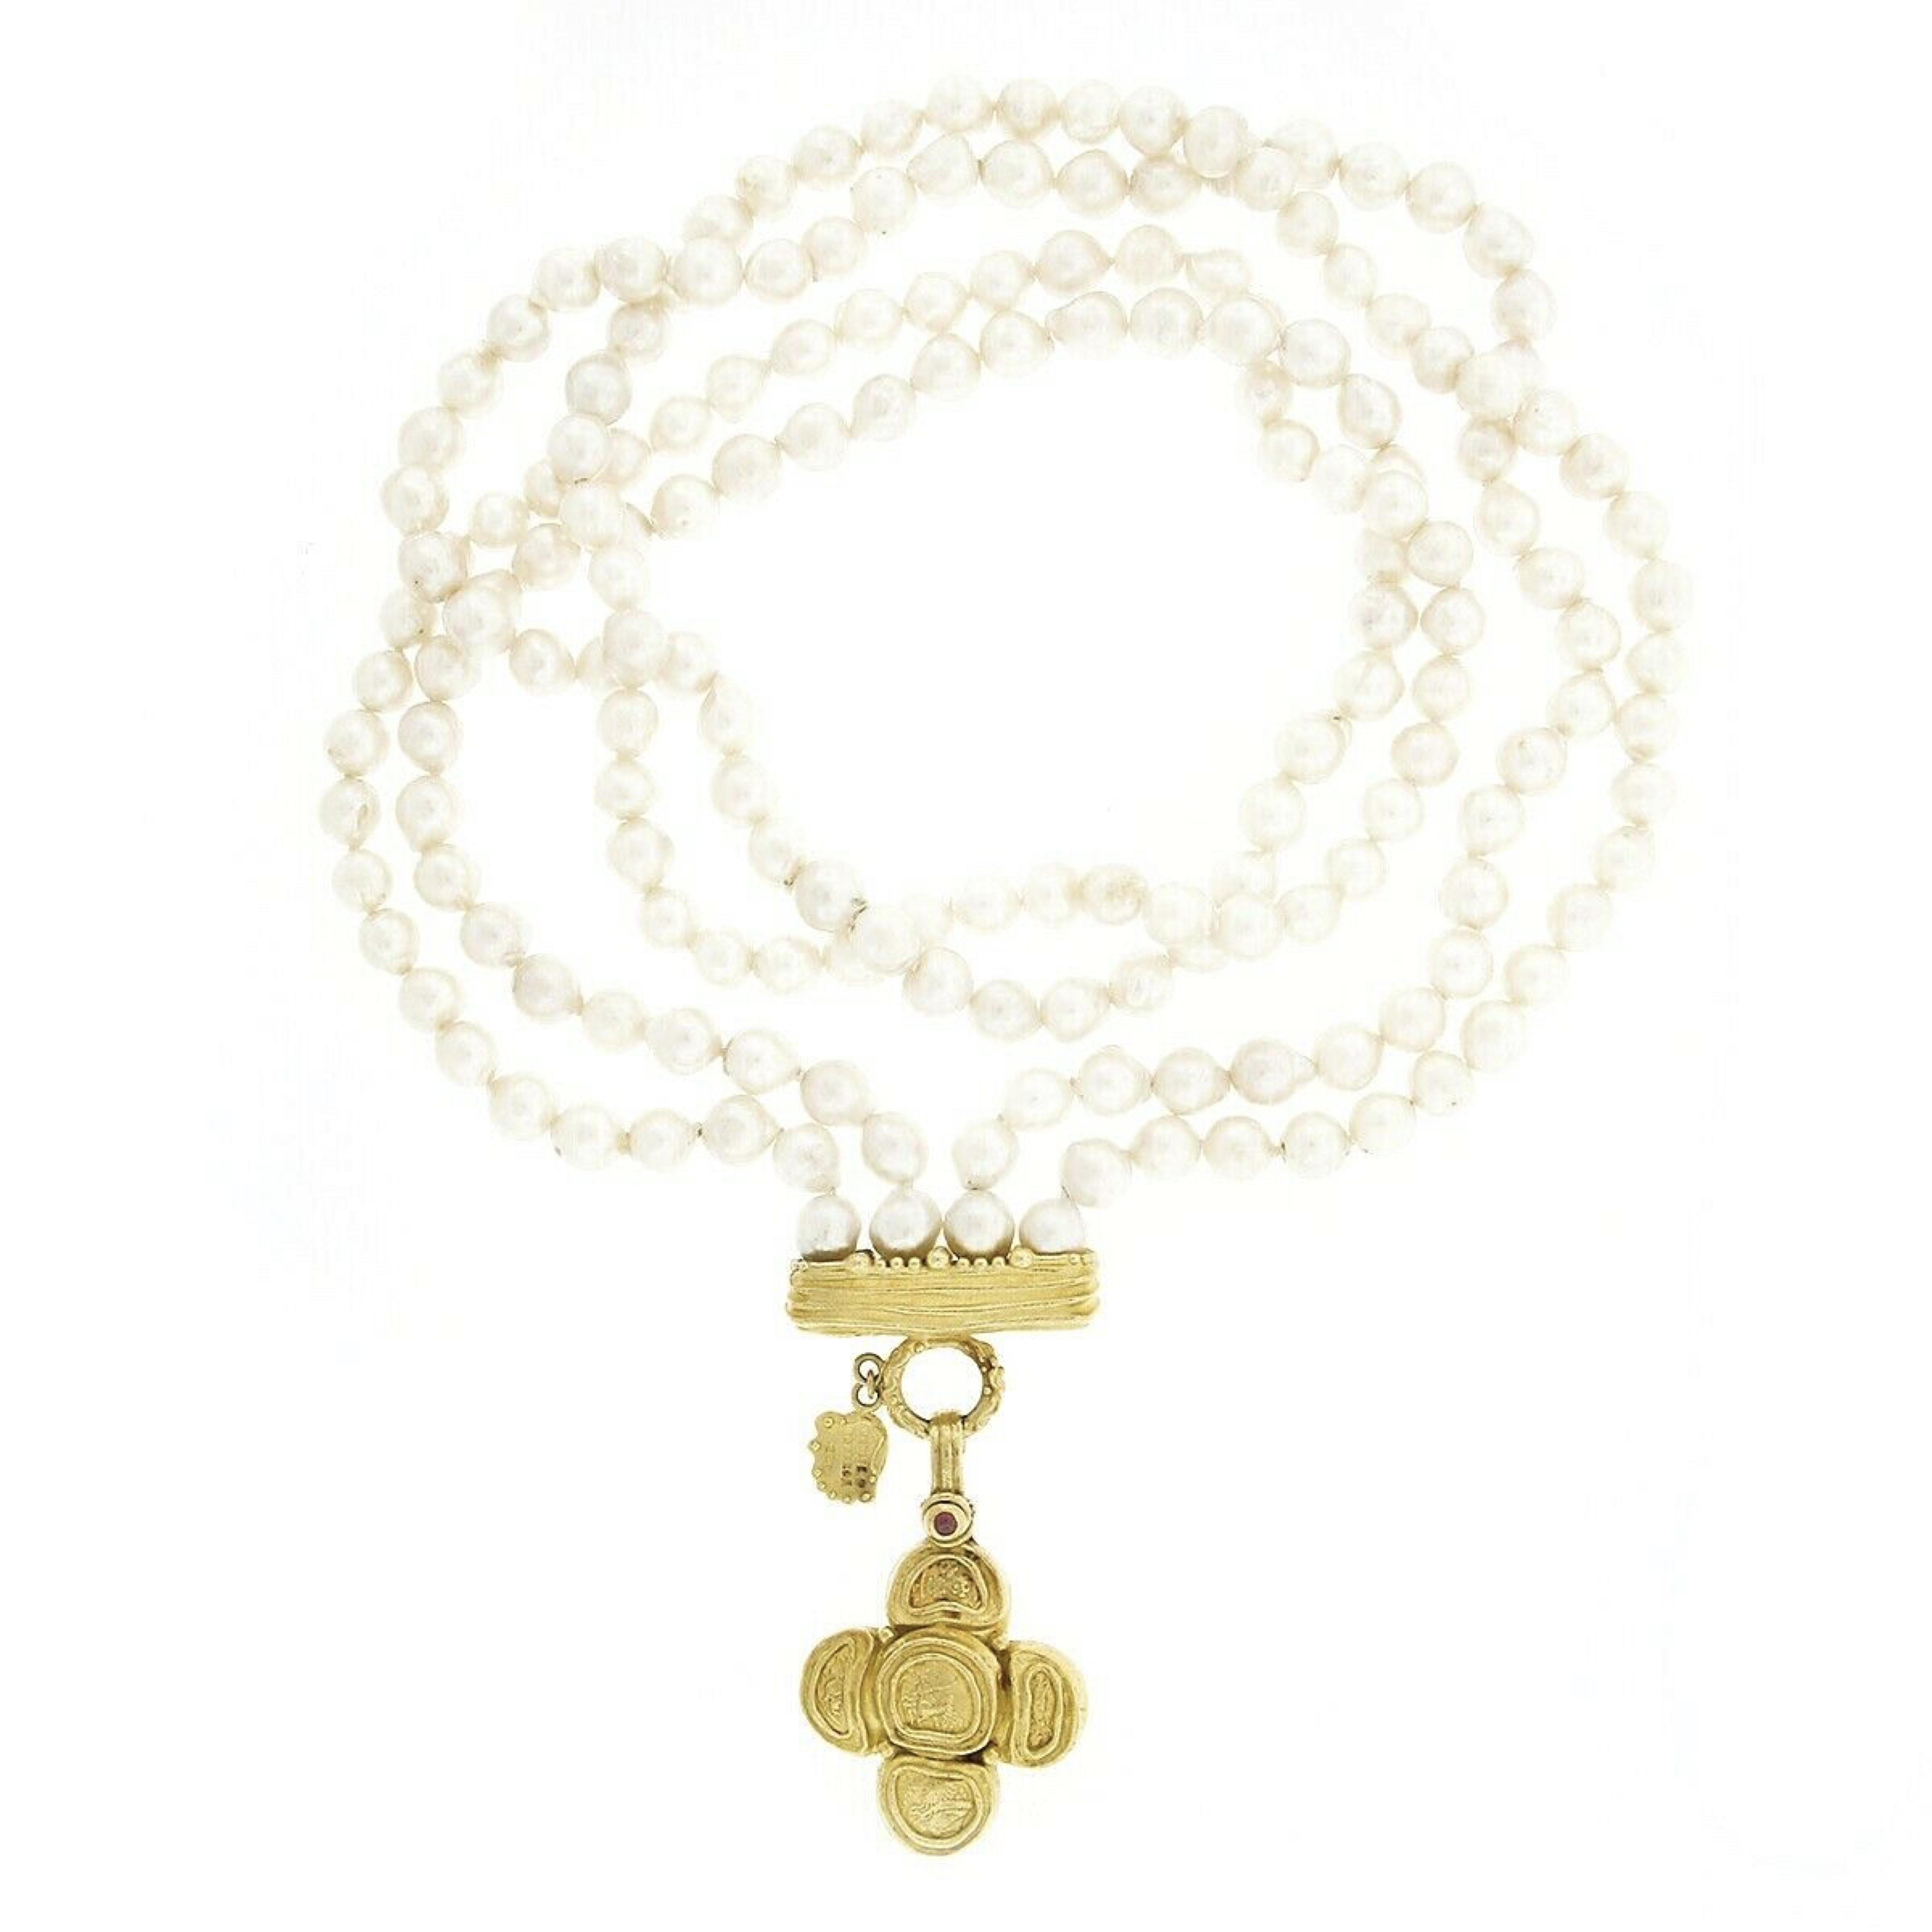 Round Cut Denise Roberge Pearl Dual Strand Necklace w/ 22k Gold Enhancer Cross Pendant